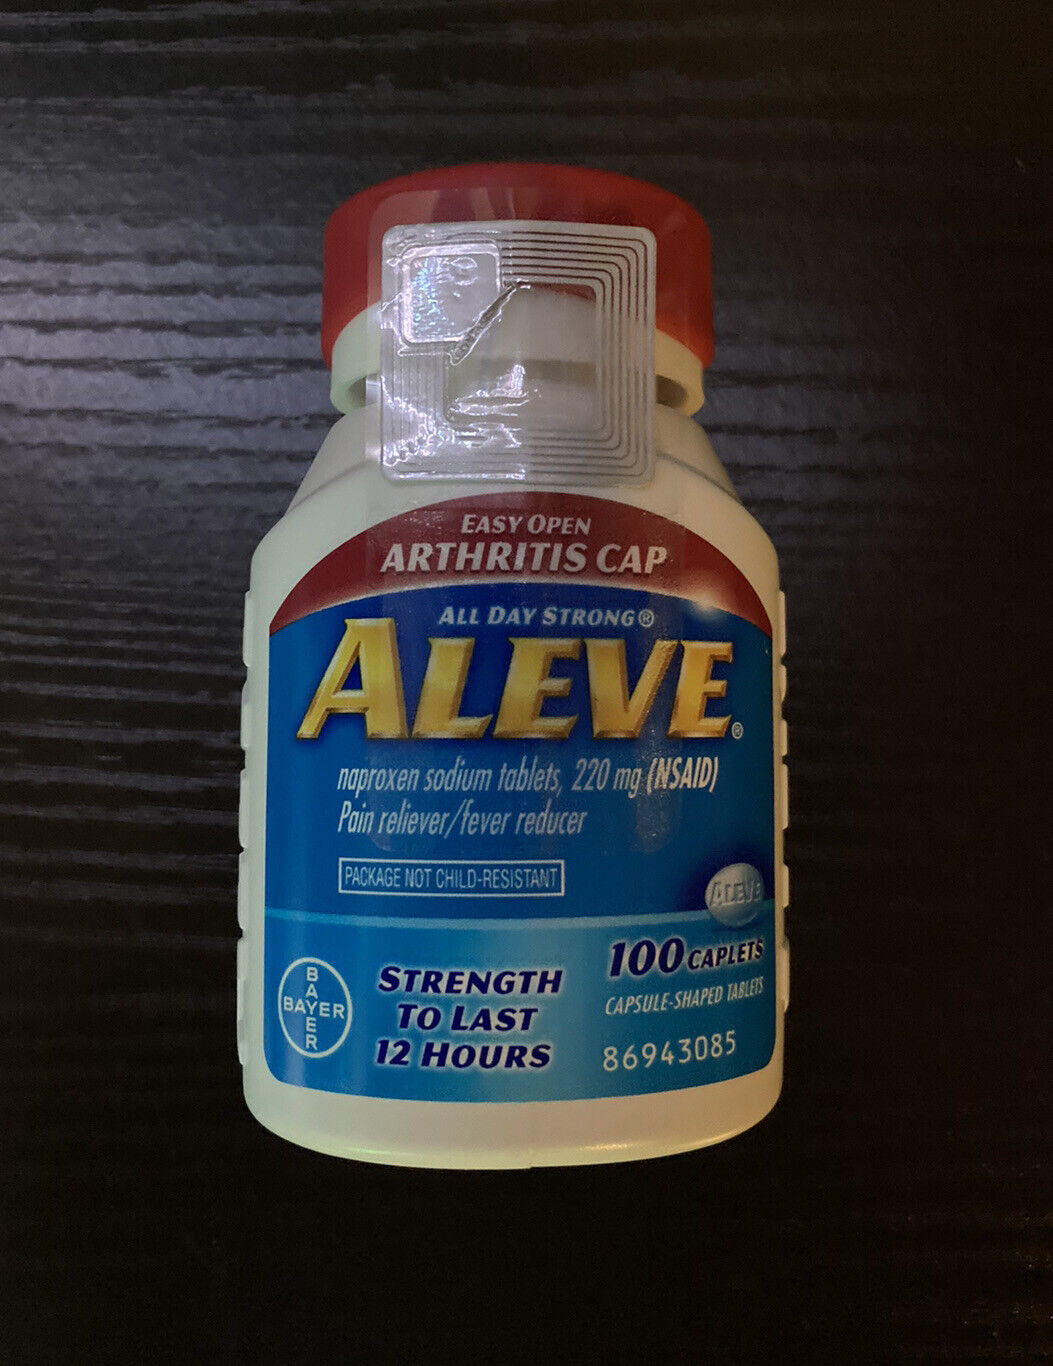 2 PACK ALEVE 100 TABLET 220mg NAPROXEN SODIUM NSAID Easy Open ARTHRITIS CAP 9/23